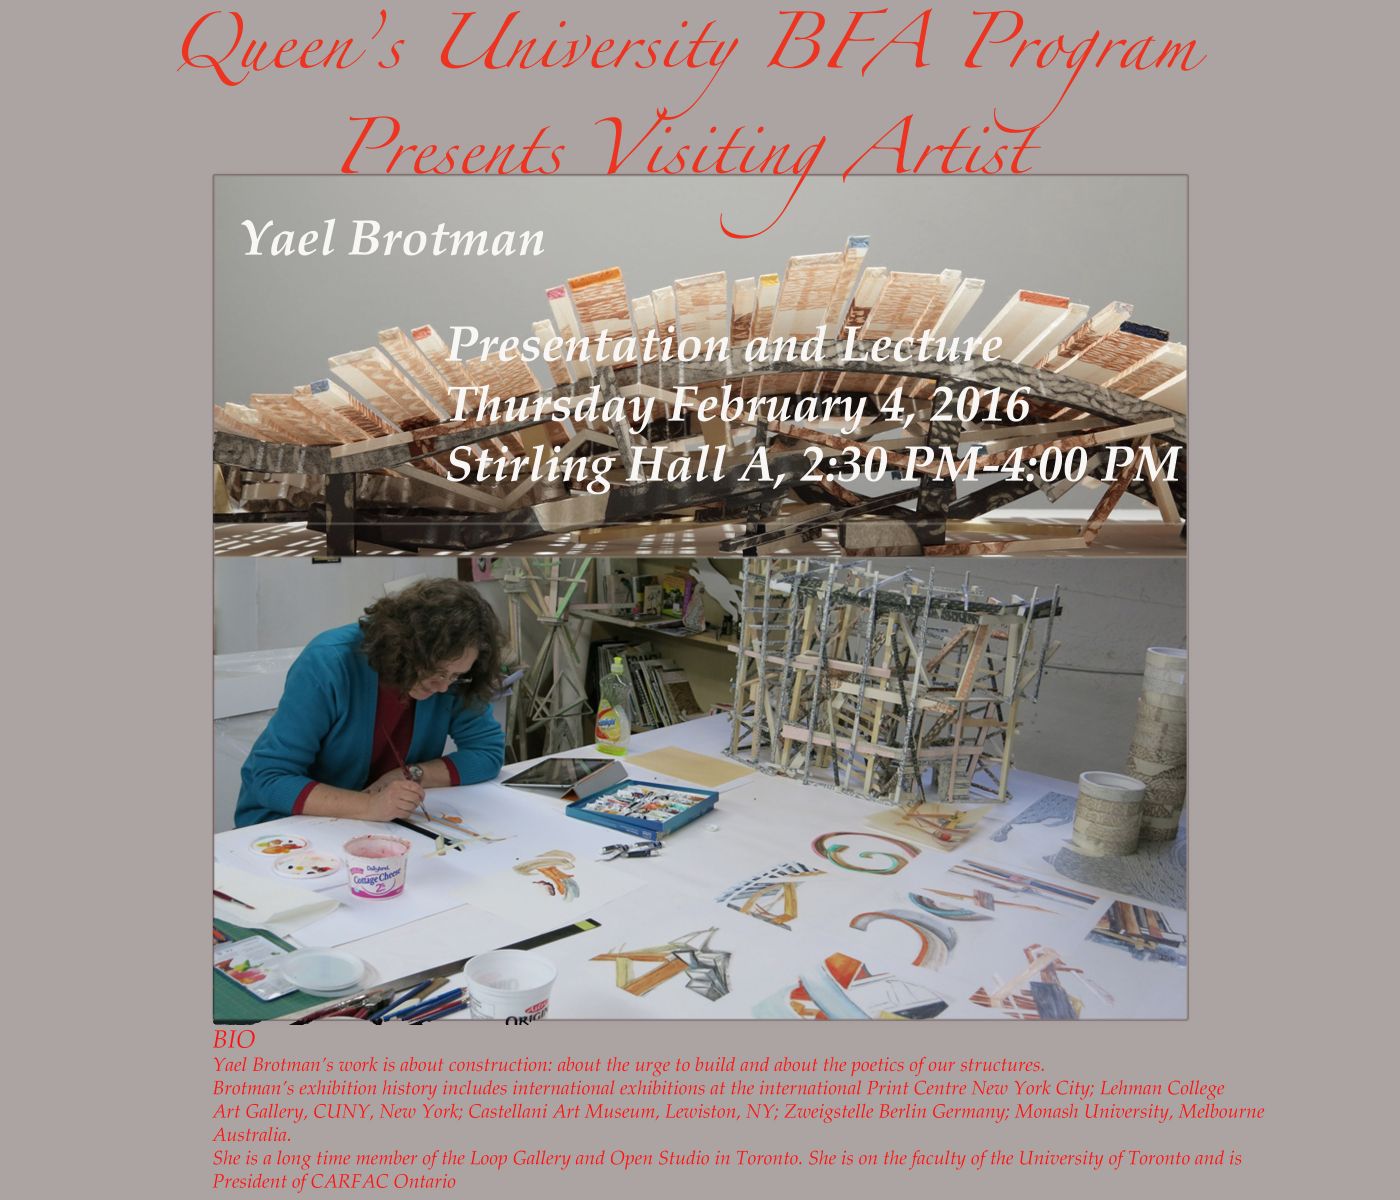 Poster of Yael Brotman's presentation and lecture.